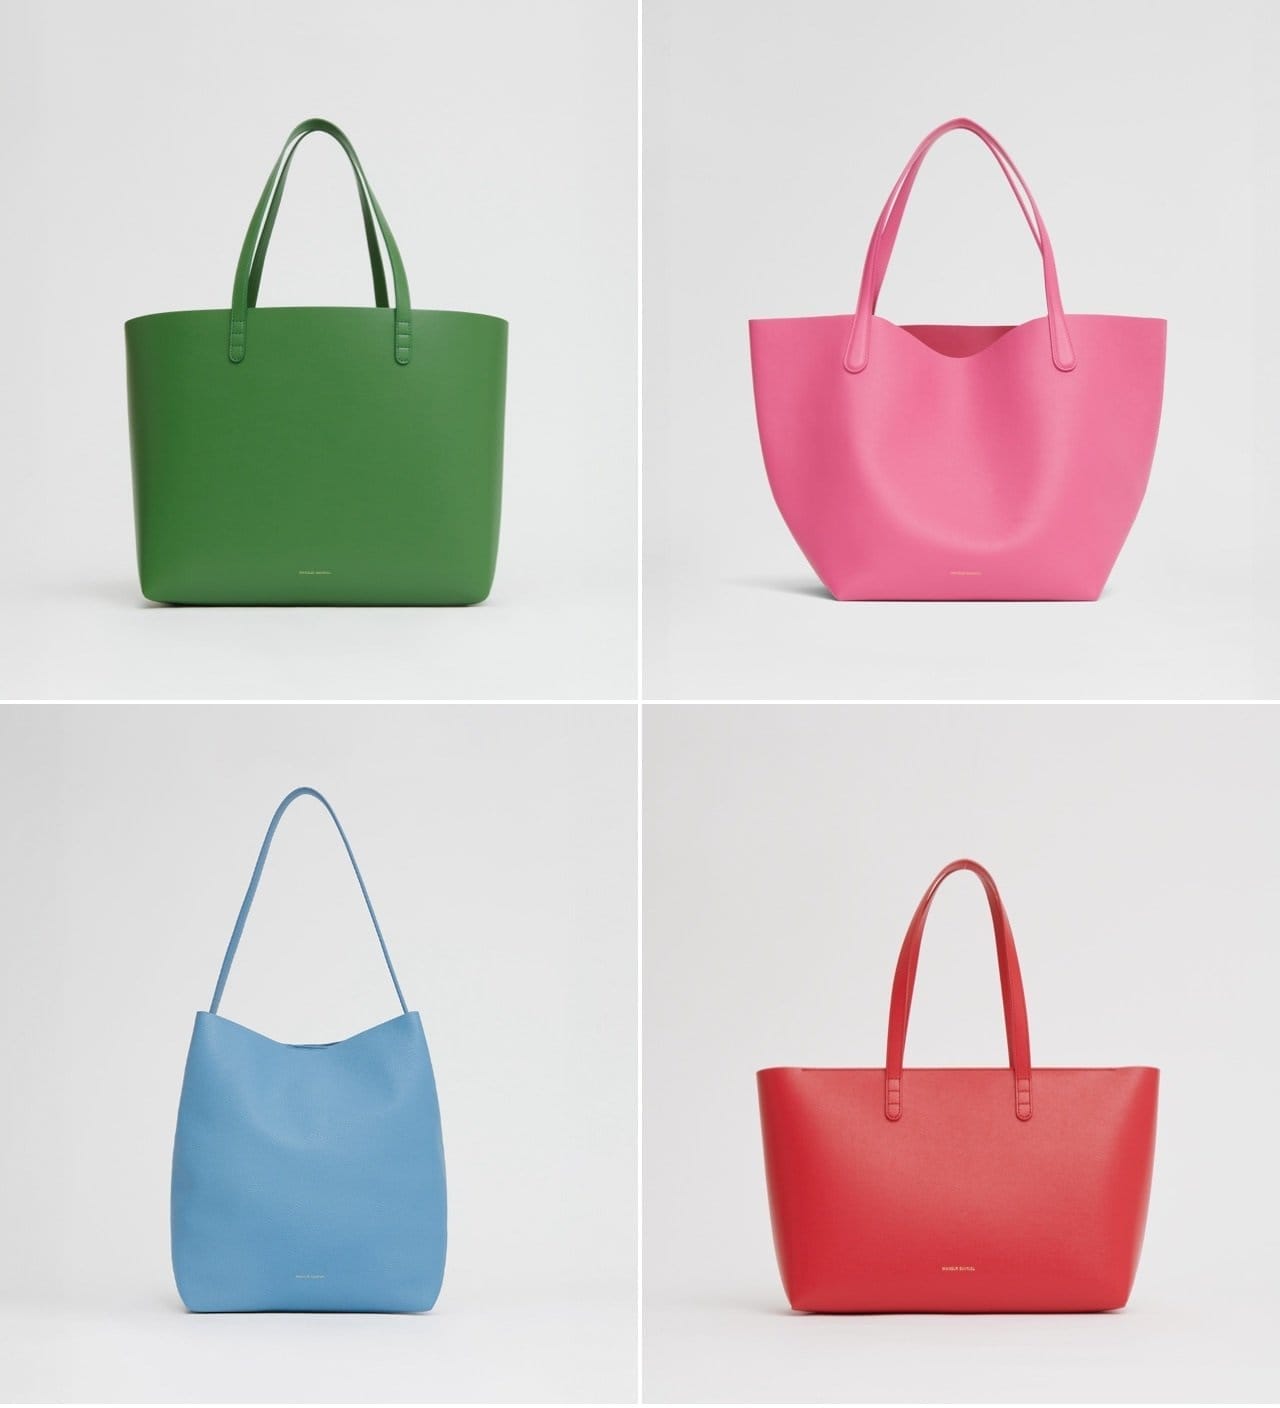 Picutred: Italian leather totes in an array of bold colors.